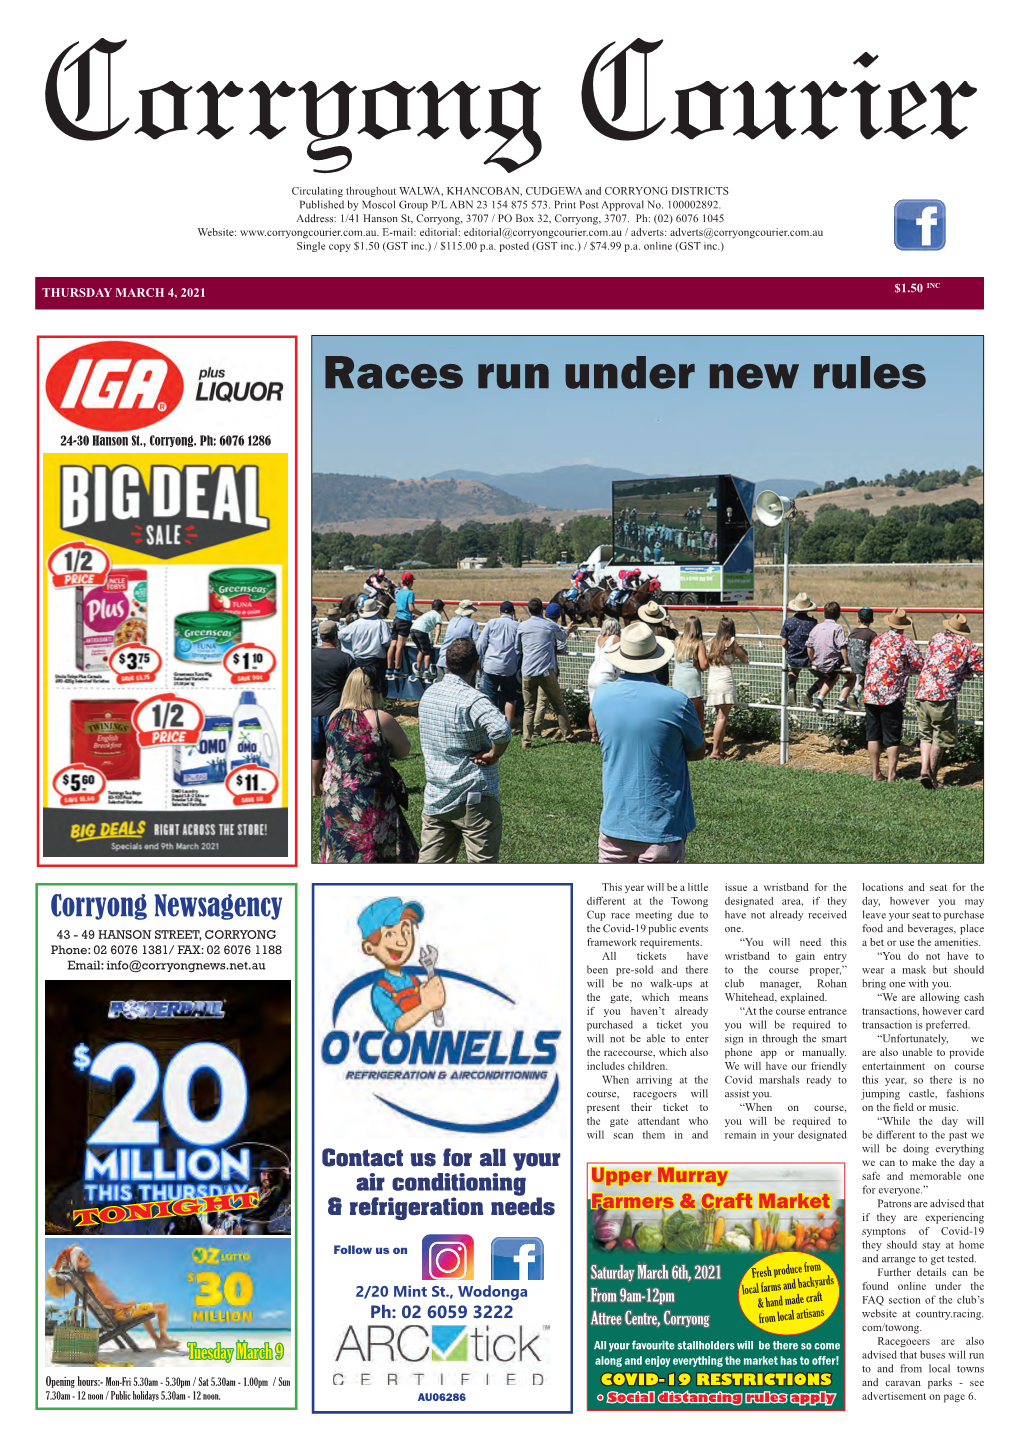 Races Run Under New Rules